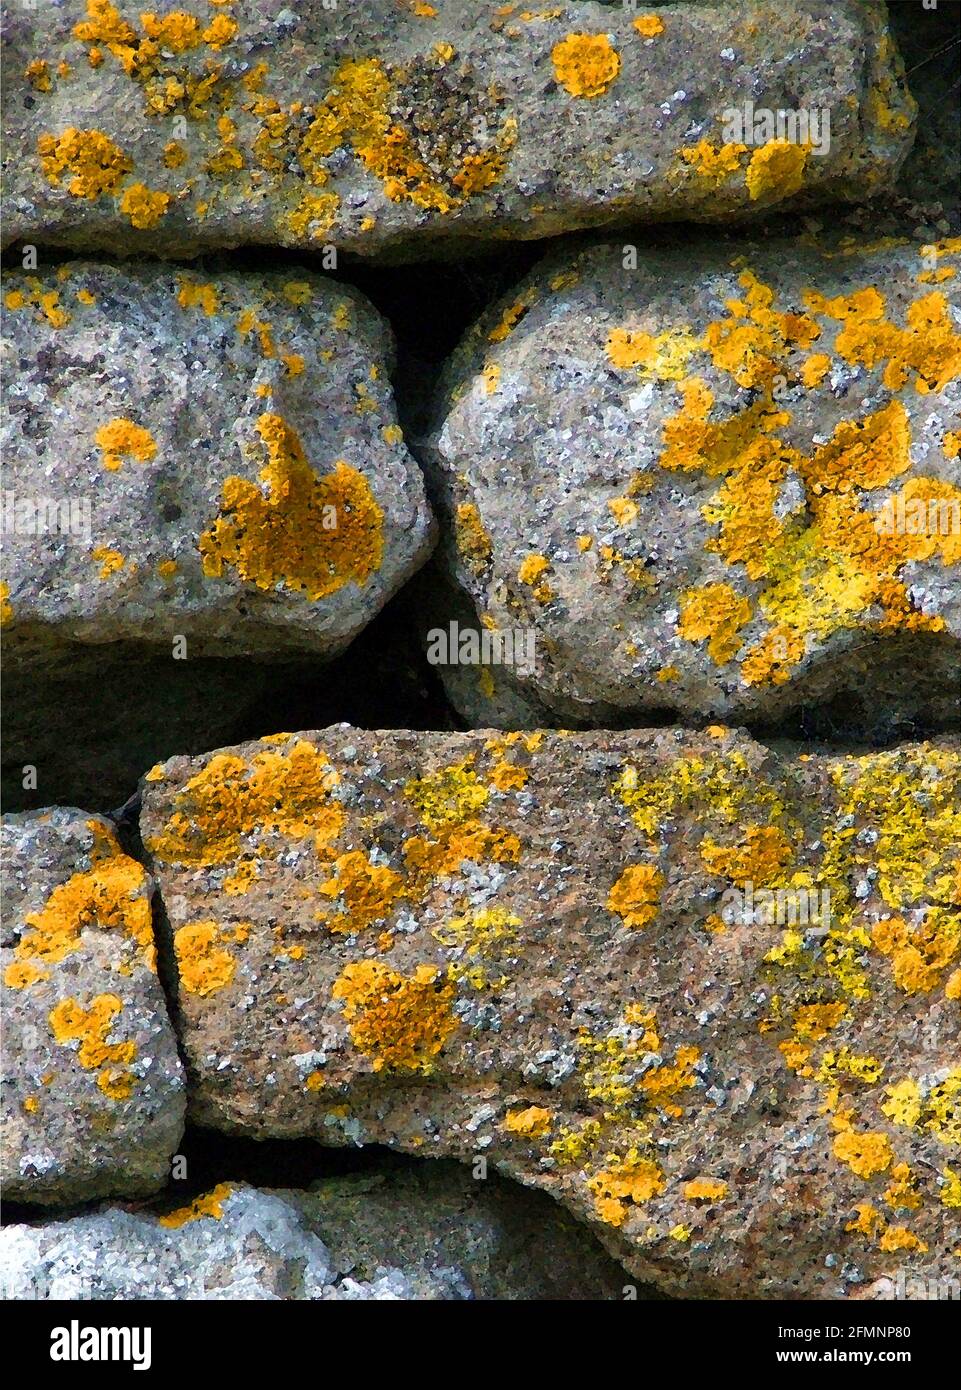 Lichen (Xanthoria parietina) One of Forty-two Iconic Images of English Garden Flowers, Wildflowers and Rural Landscapes. Stock Photo